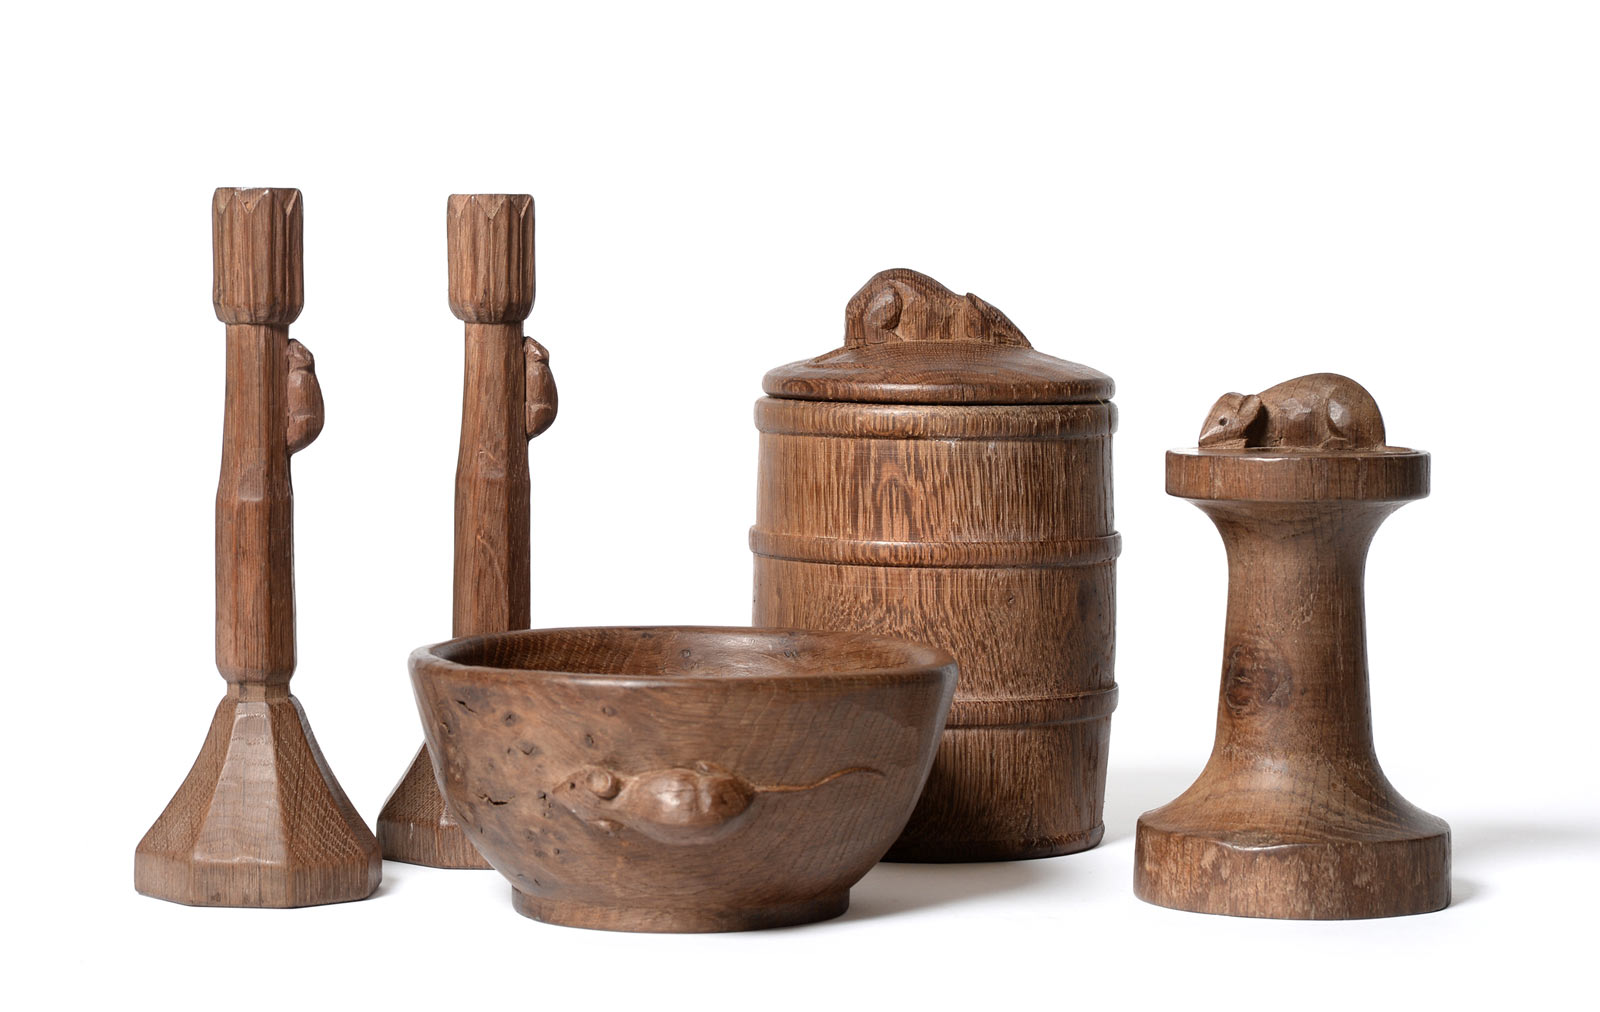 Four lots from a Private Collection of Robert ‘Mouseman’ Thompson, made for Patricia Kirk of Kilburn, including an Oak Jar and Cover (Sold for a hammer price of £3,400), and an unusual bobbin-form Oak Candlestick (Sold for a hammer price of £1,700)